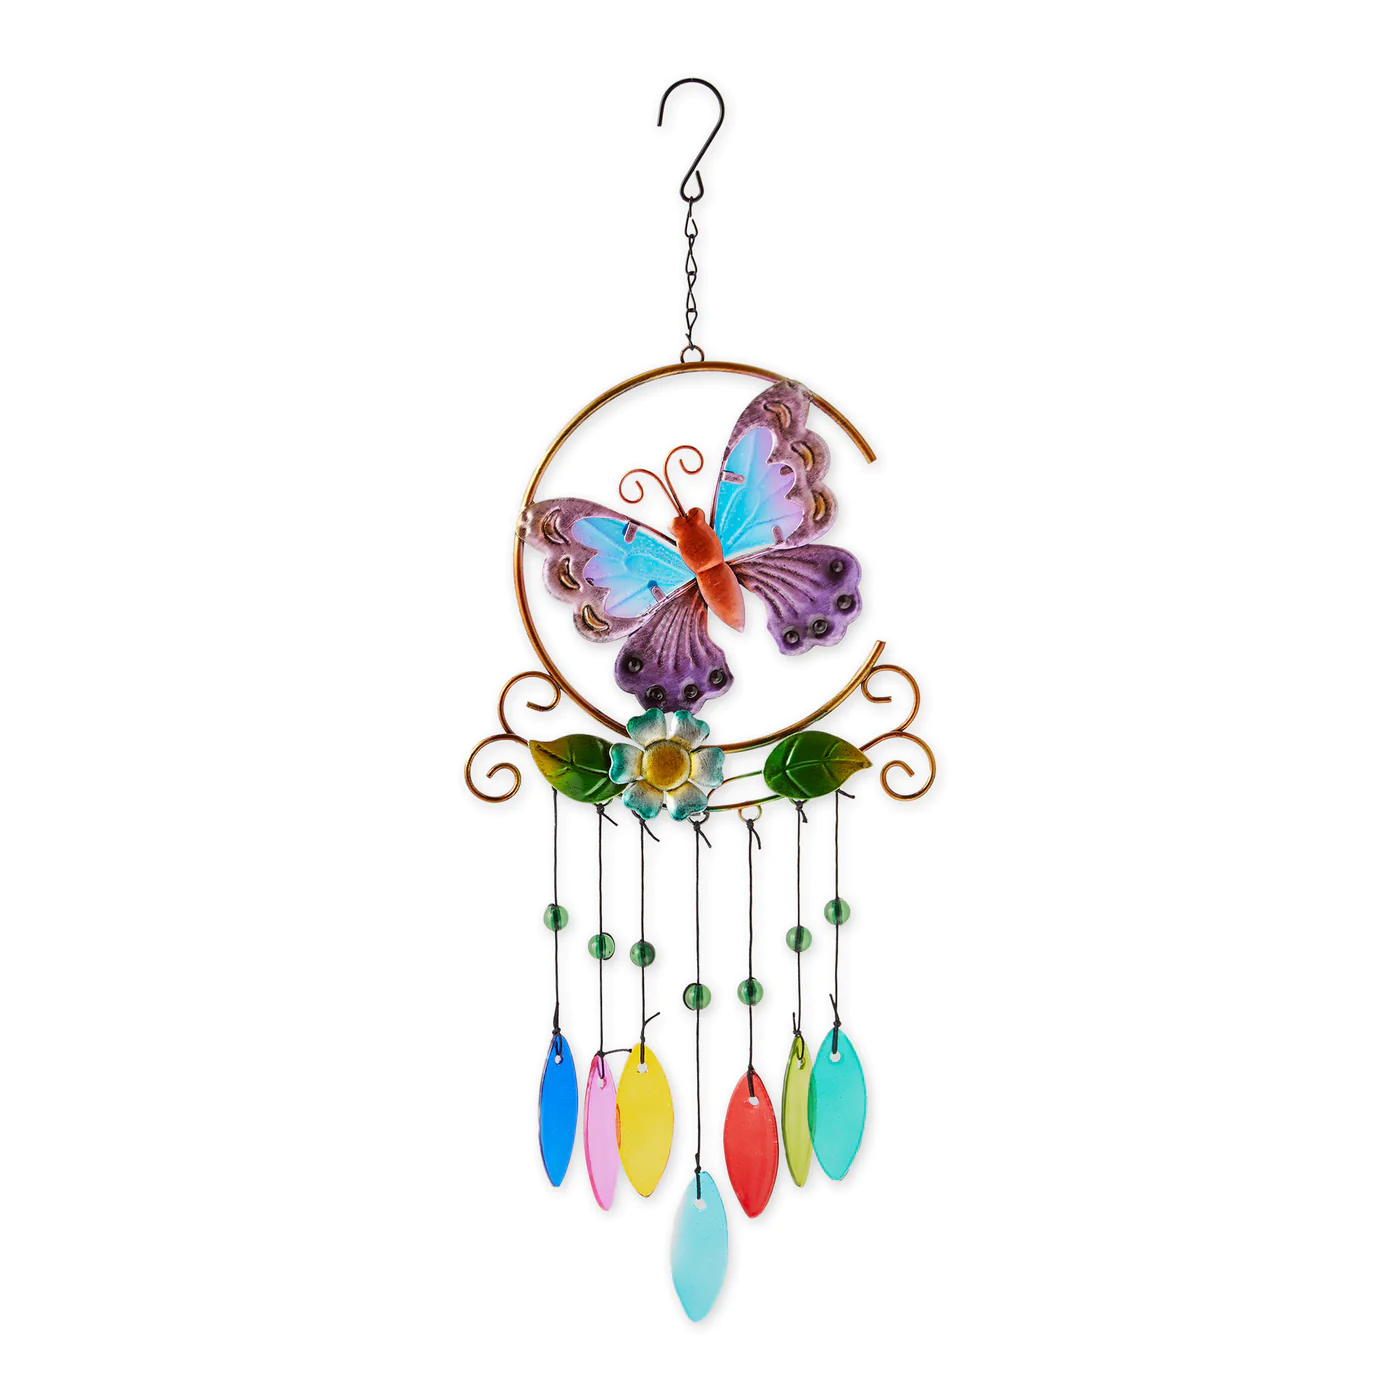 Glass Leaves Wind Chime - Butterfly Iron Ornament - $34.26